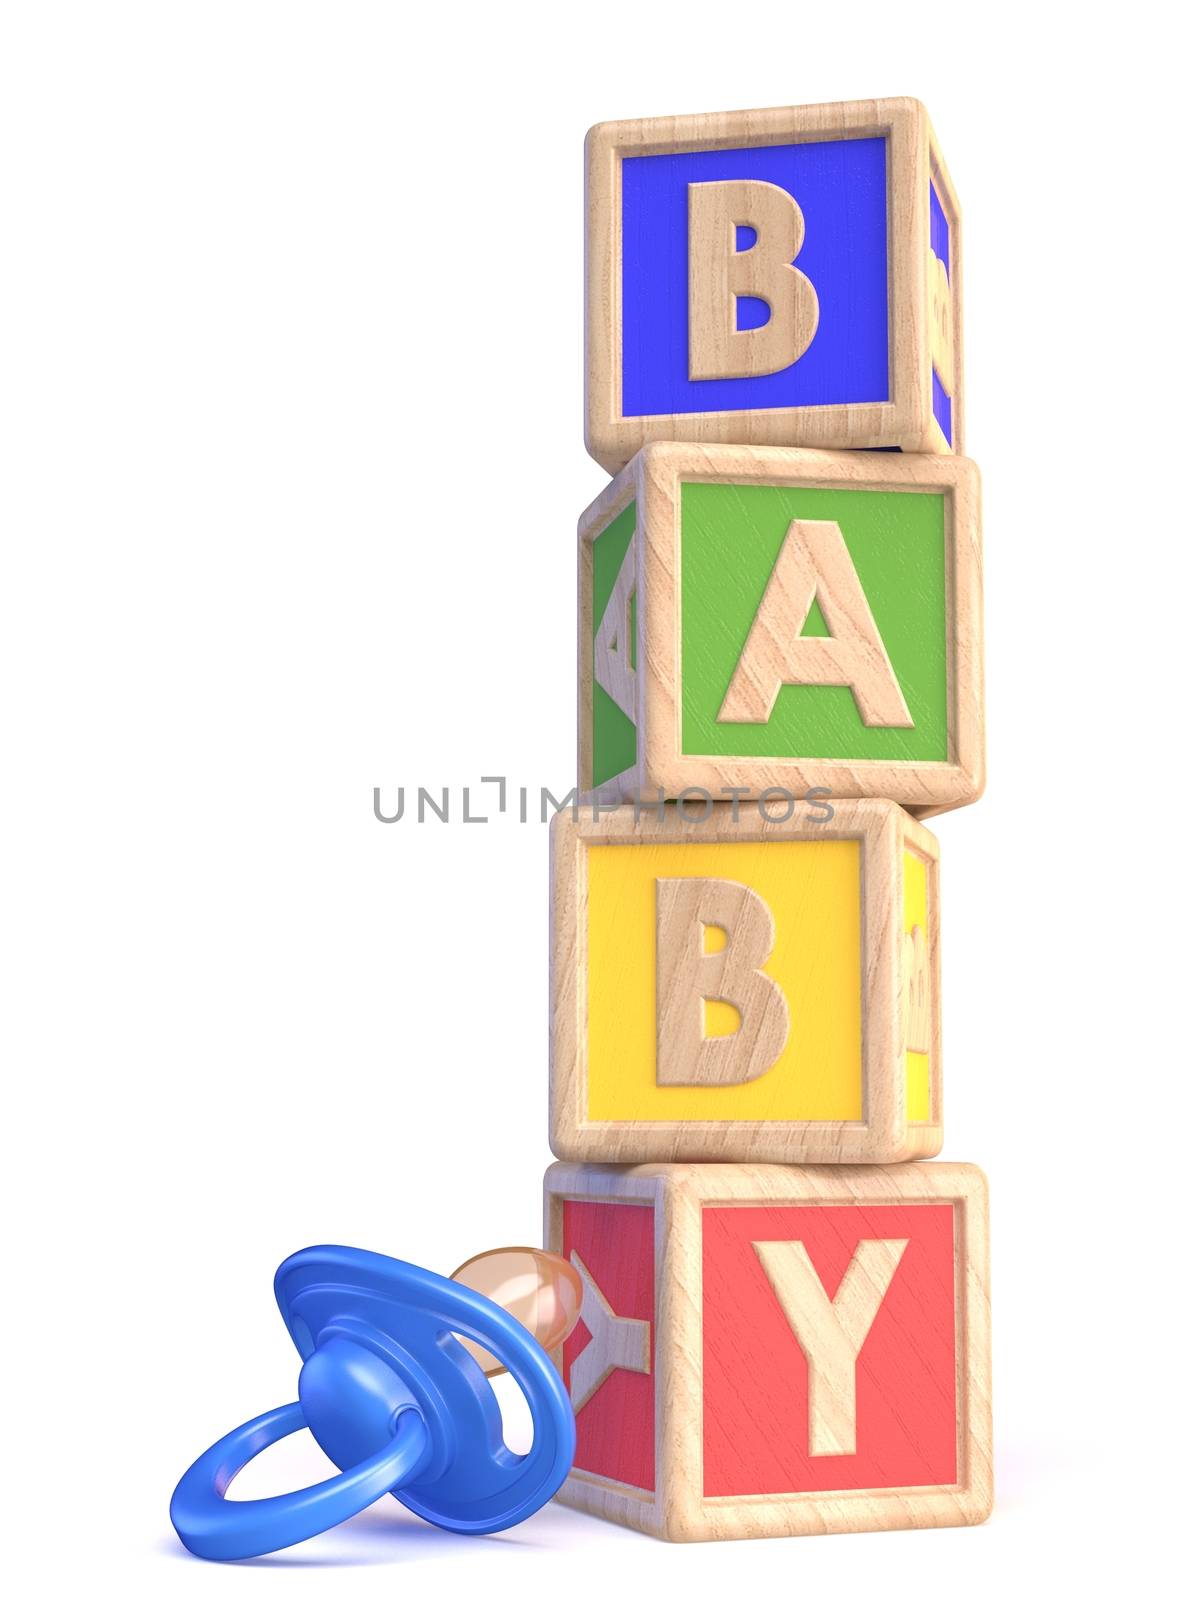 Word BABY made of wooden blocks toy and baby pacifier 3D render illustration isolated on white background